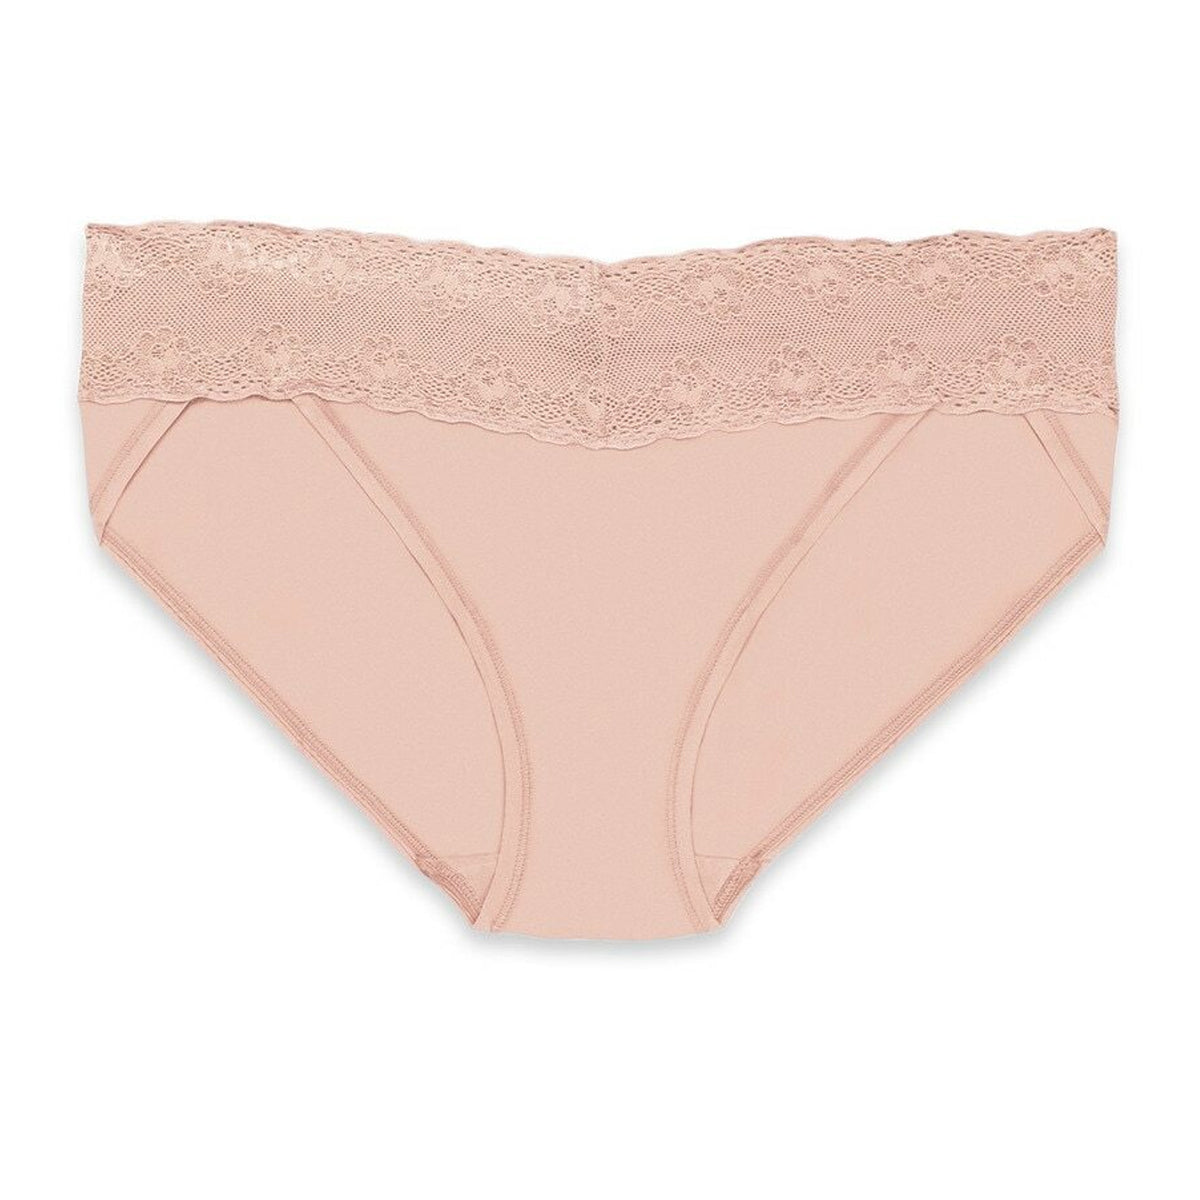 Bliss Perfection V Kini Panty BEST